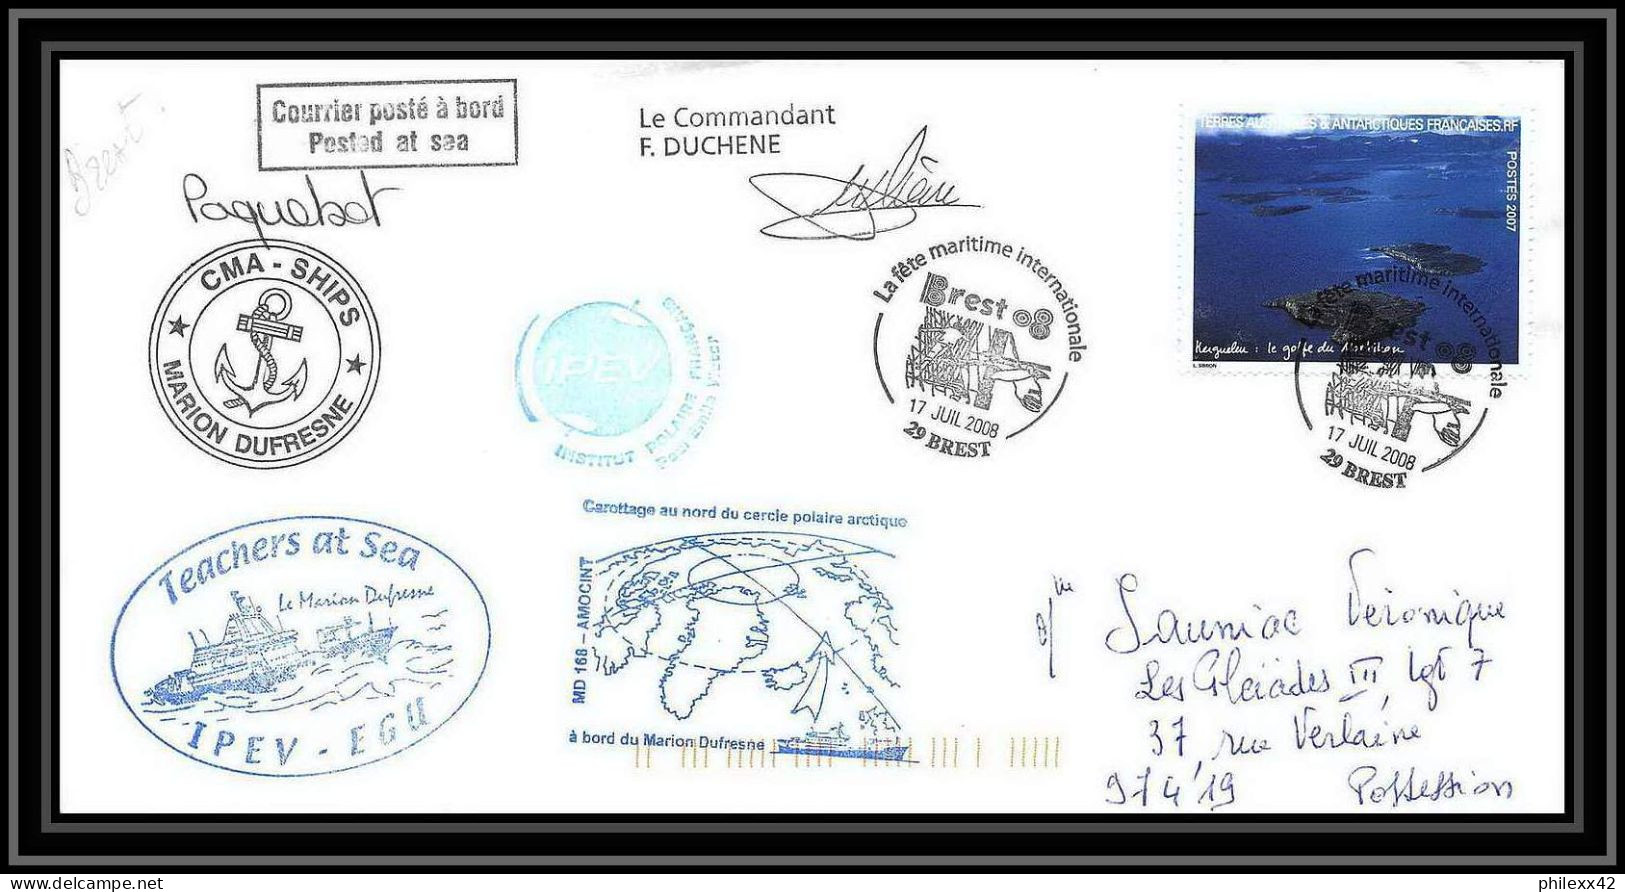 2818 ANTARCTIC Terres Australes TAAF Lettre Cover Dufresne 2 Signé Signed BREST MD 168 17/7/2008 N°481 - Spedizioni Antartiche